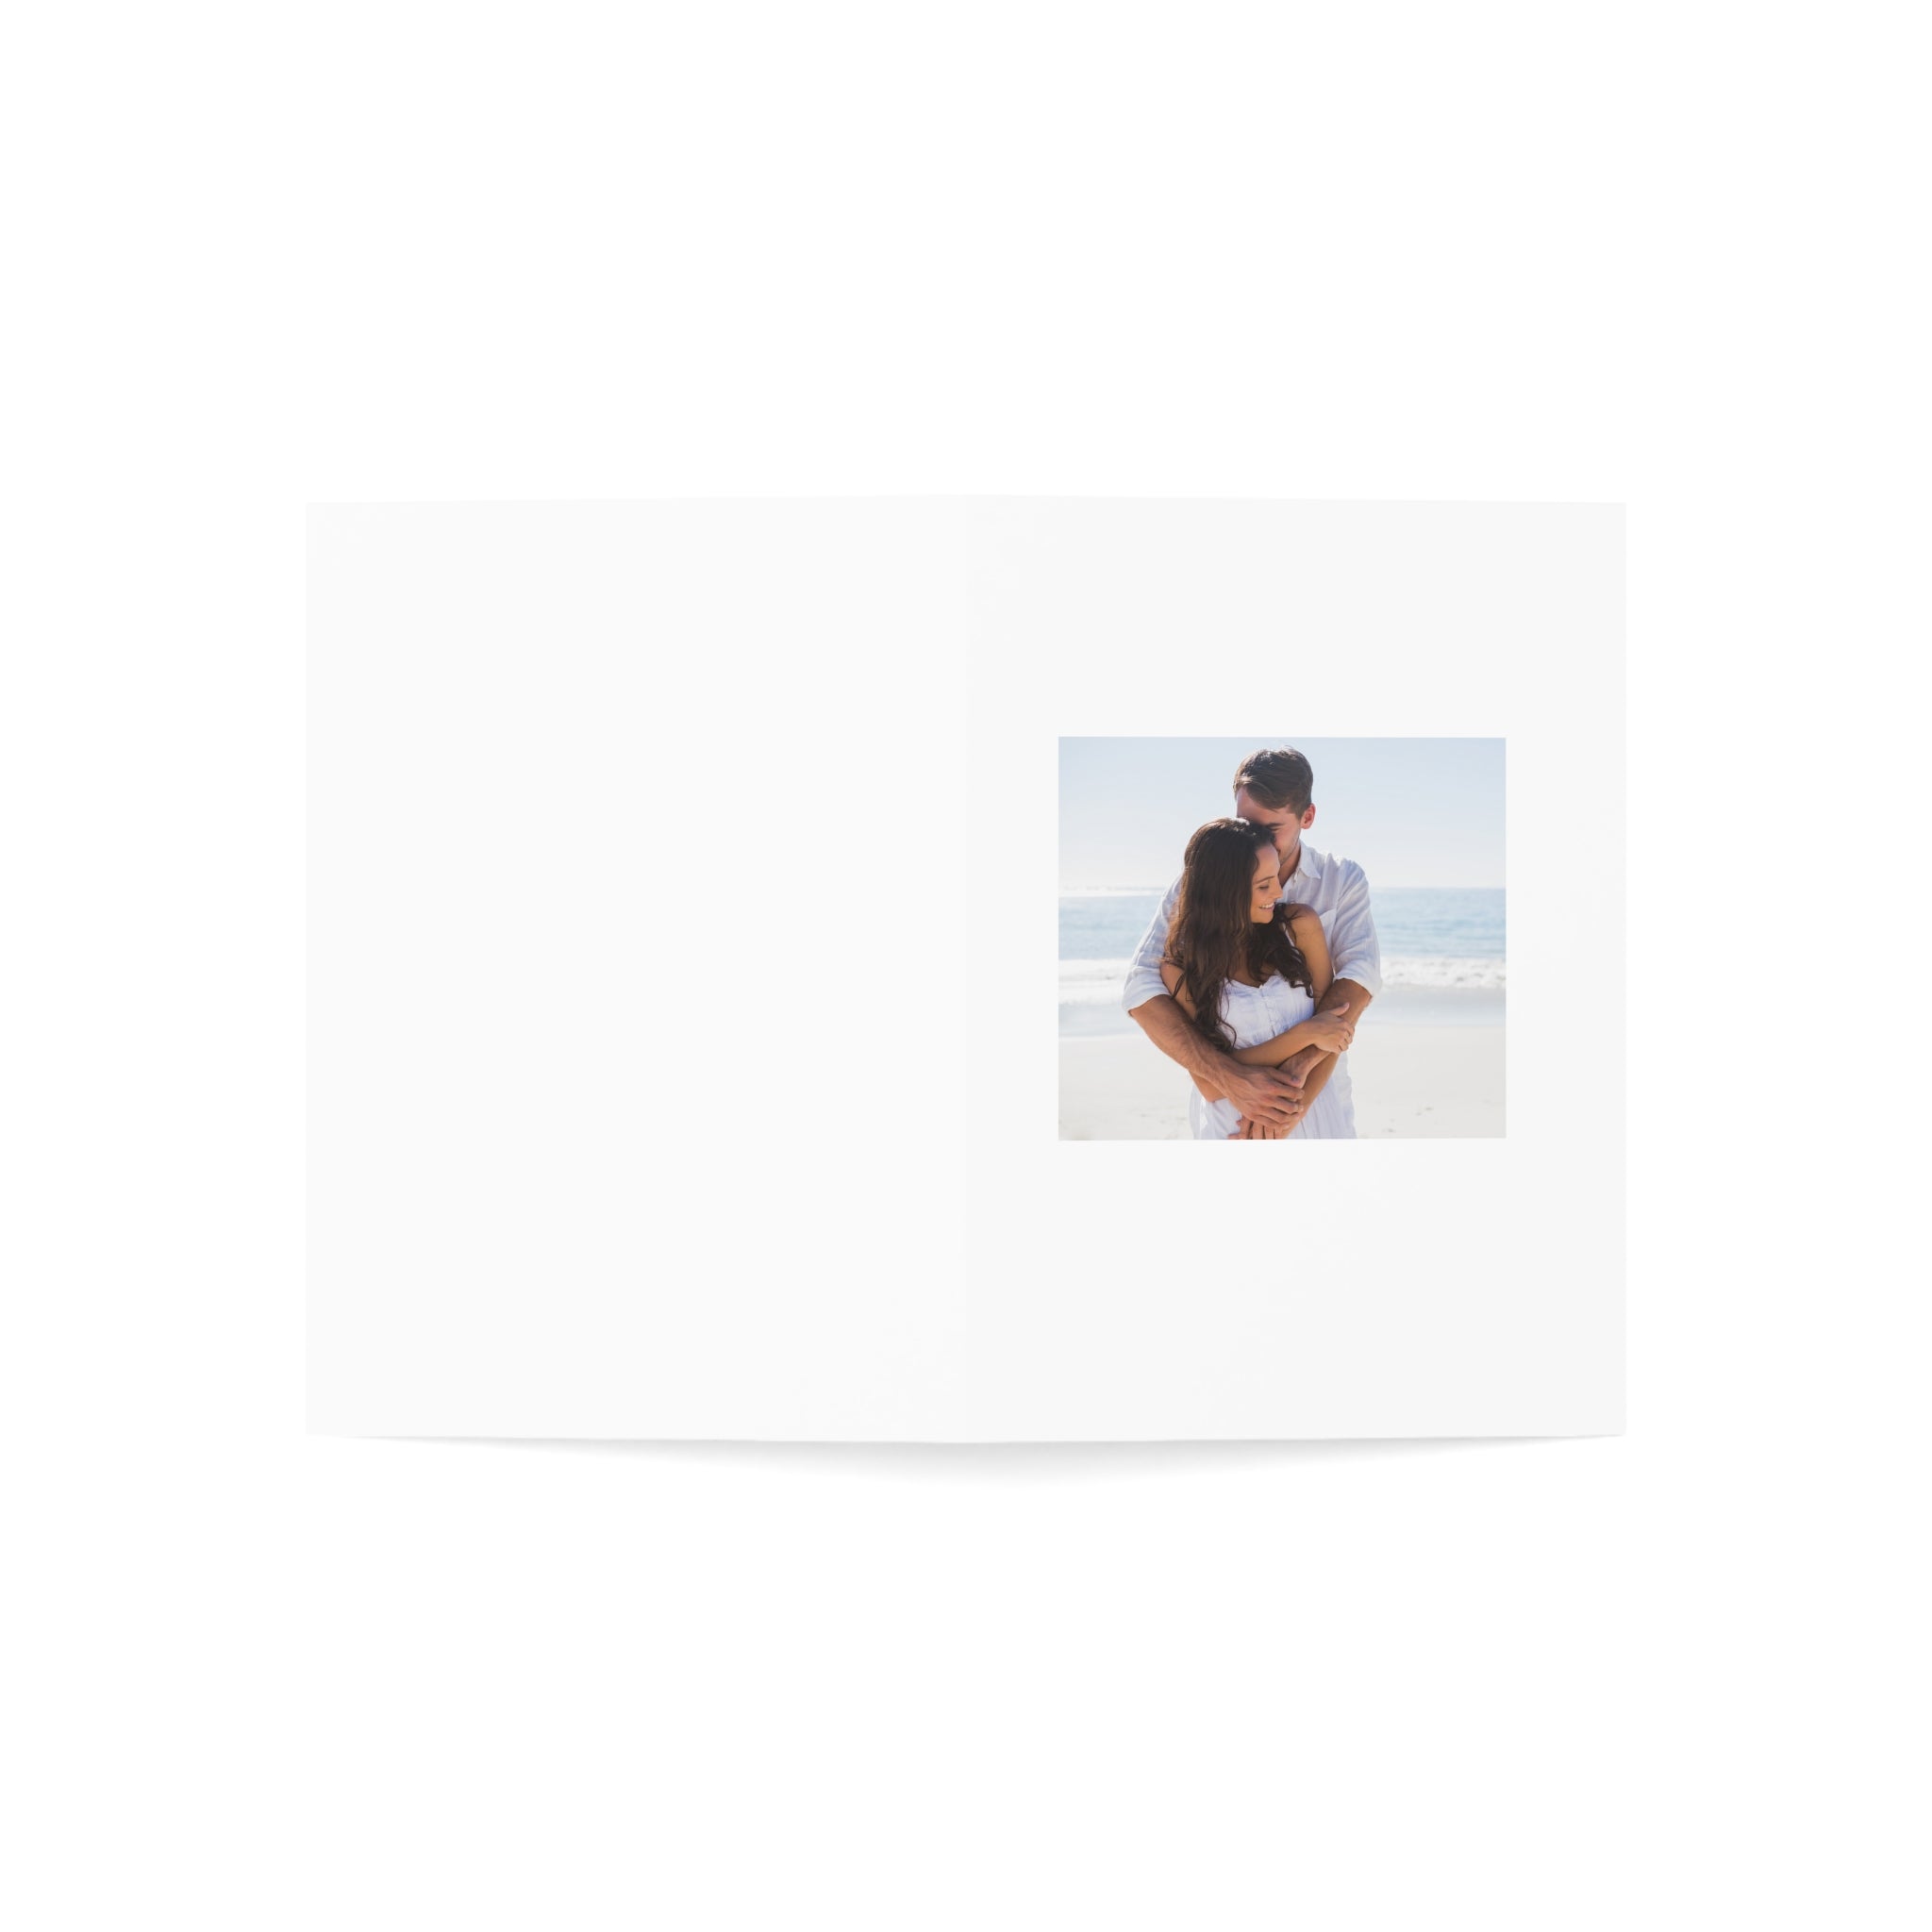 Greeting Cards - Embracing on a beach